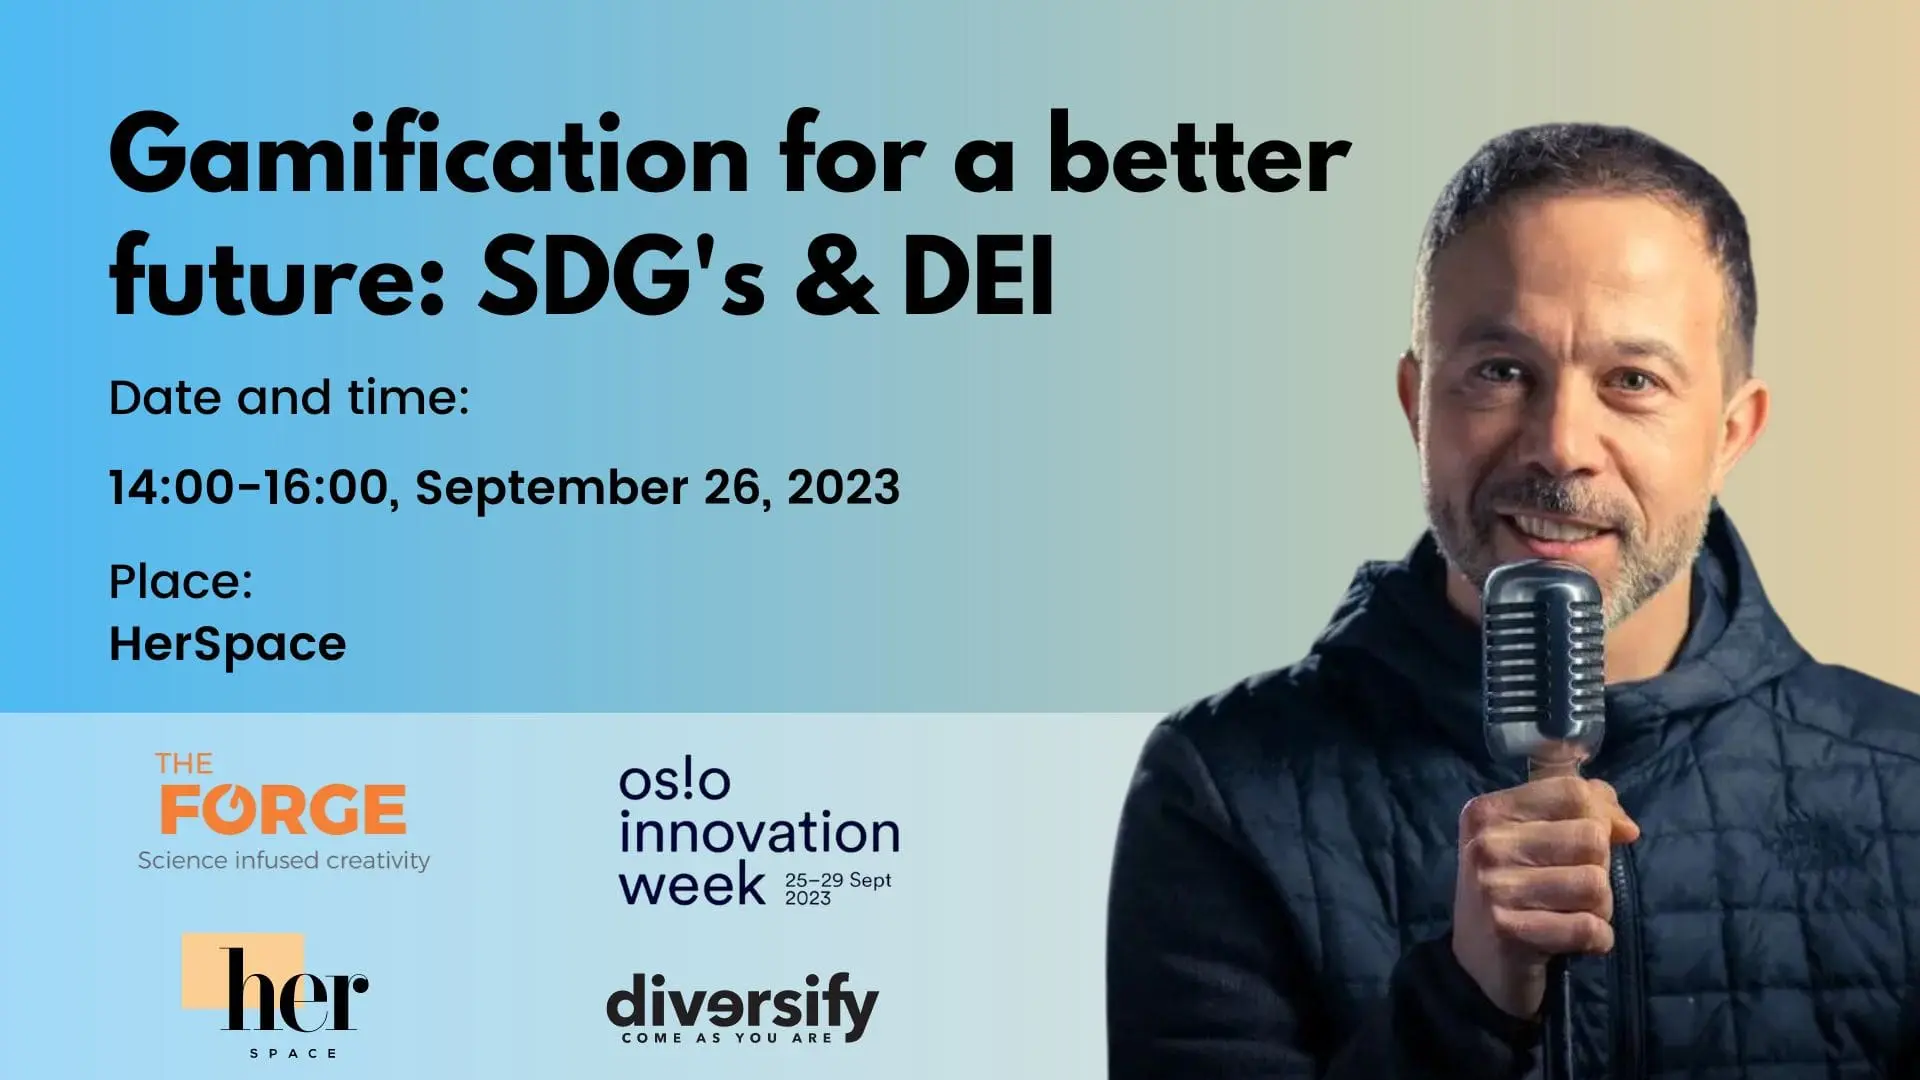 Gamification for a better future: SDG's & DEI event poster